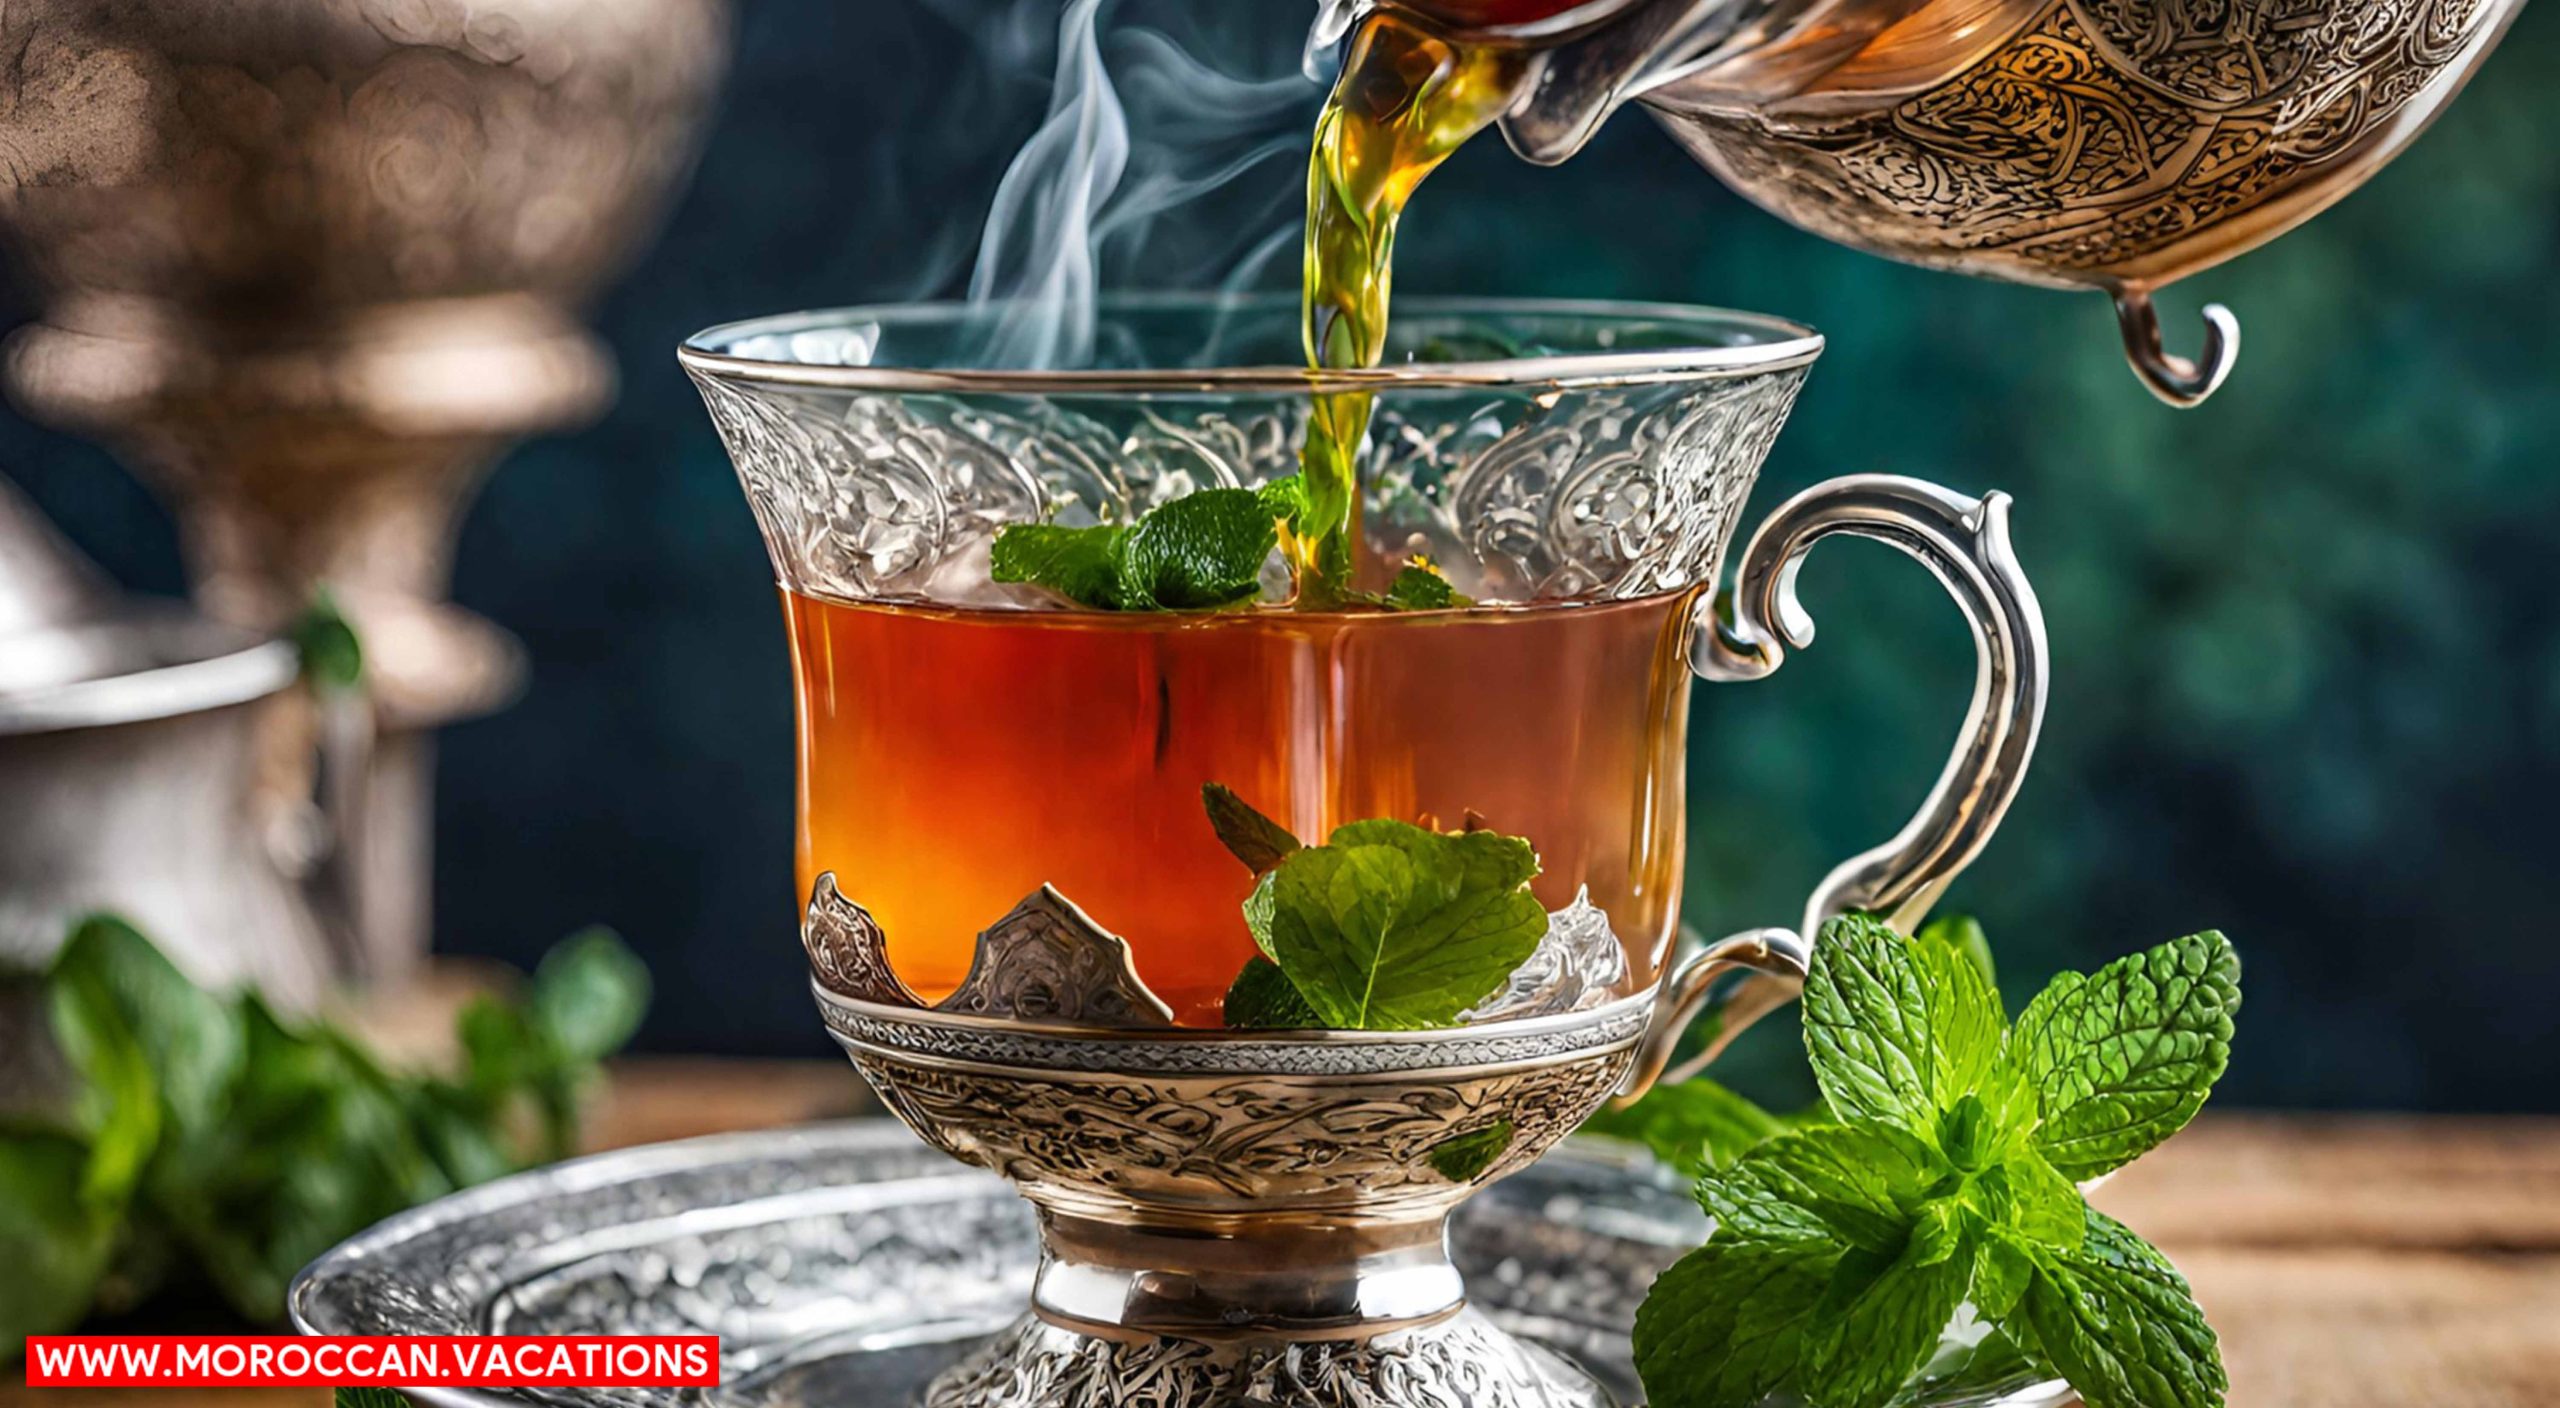 A refreshing Moroccan mint tea being poured into a traditional glass teacup.